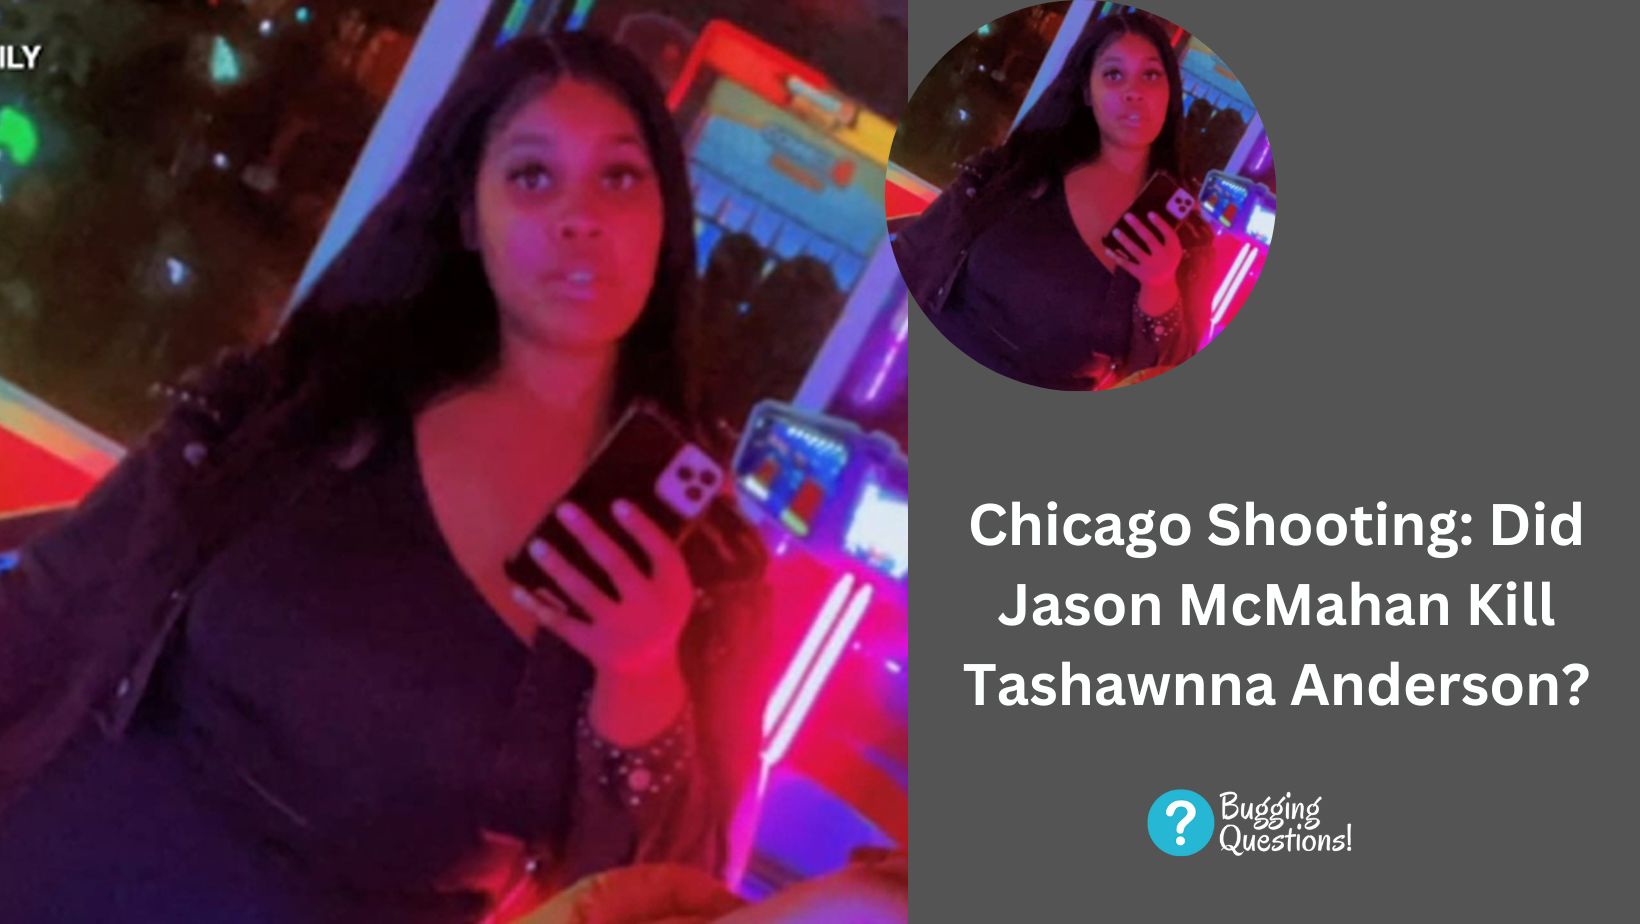 Chicago Shooting: Did Jason McMahan Kill Tashawnna Anderson? Here Is What You Should Know